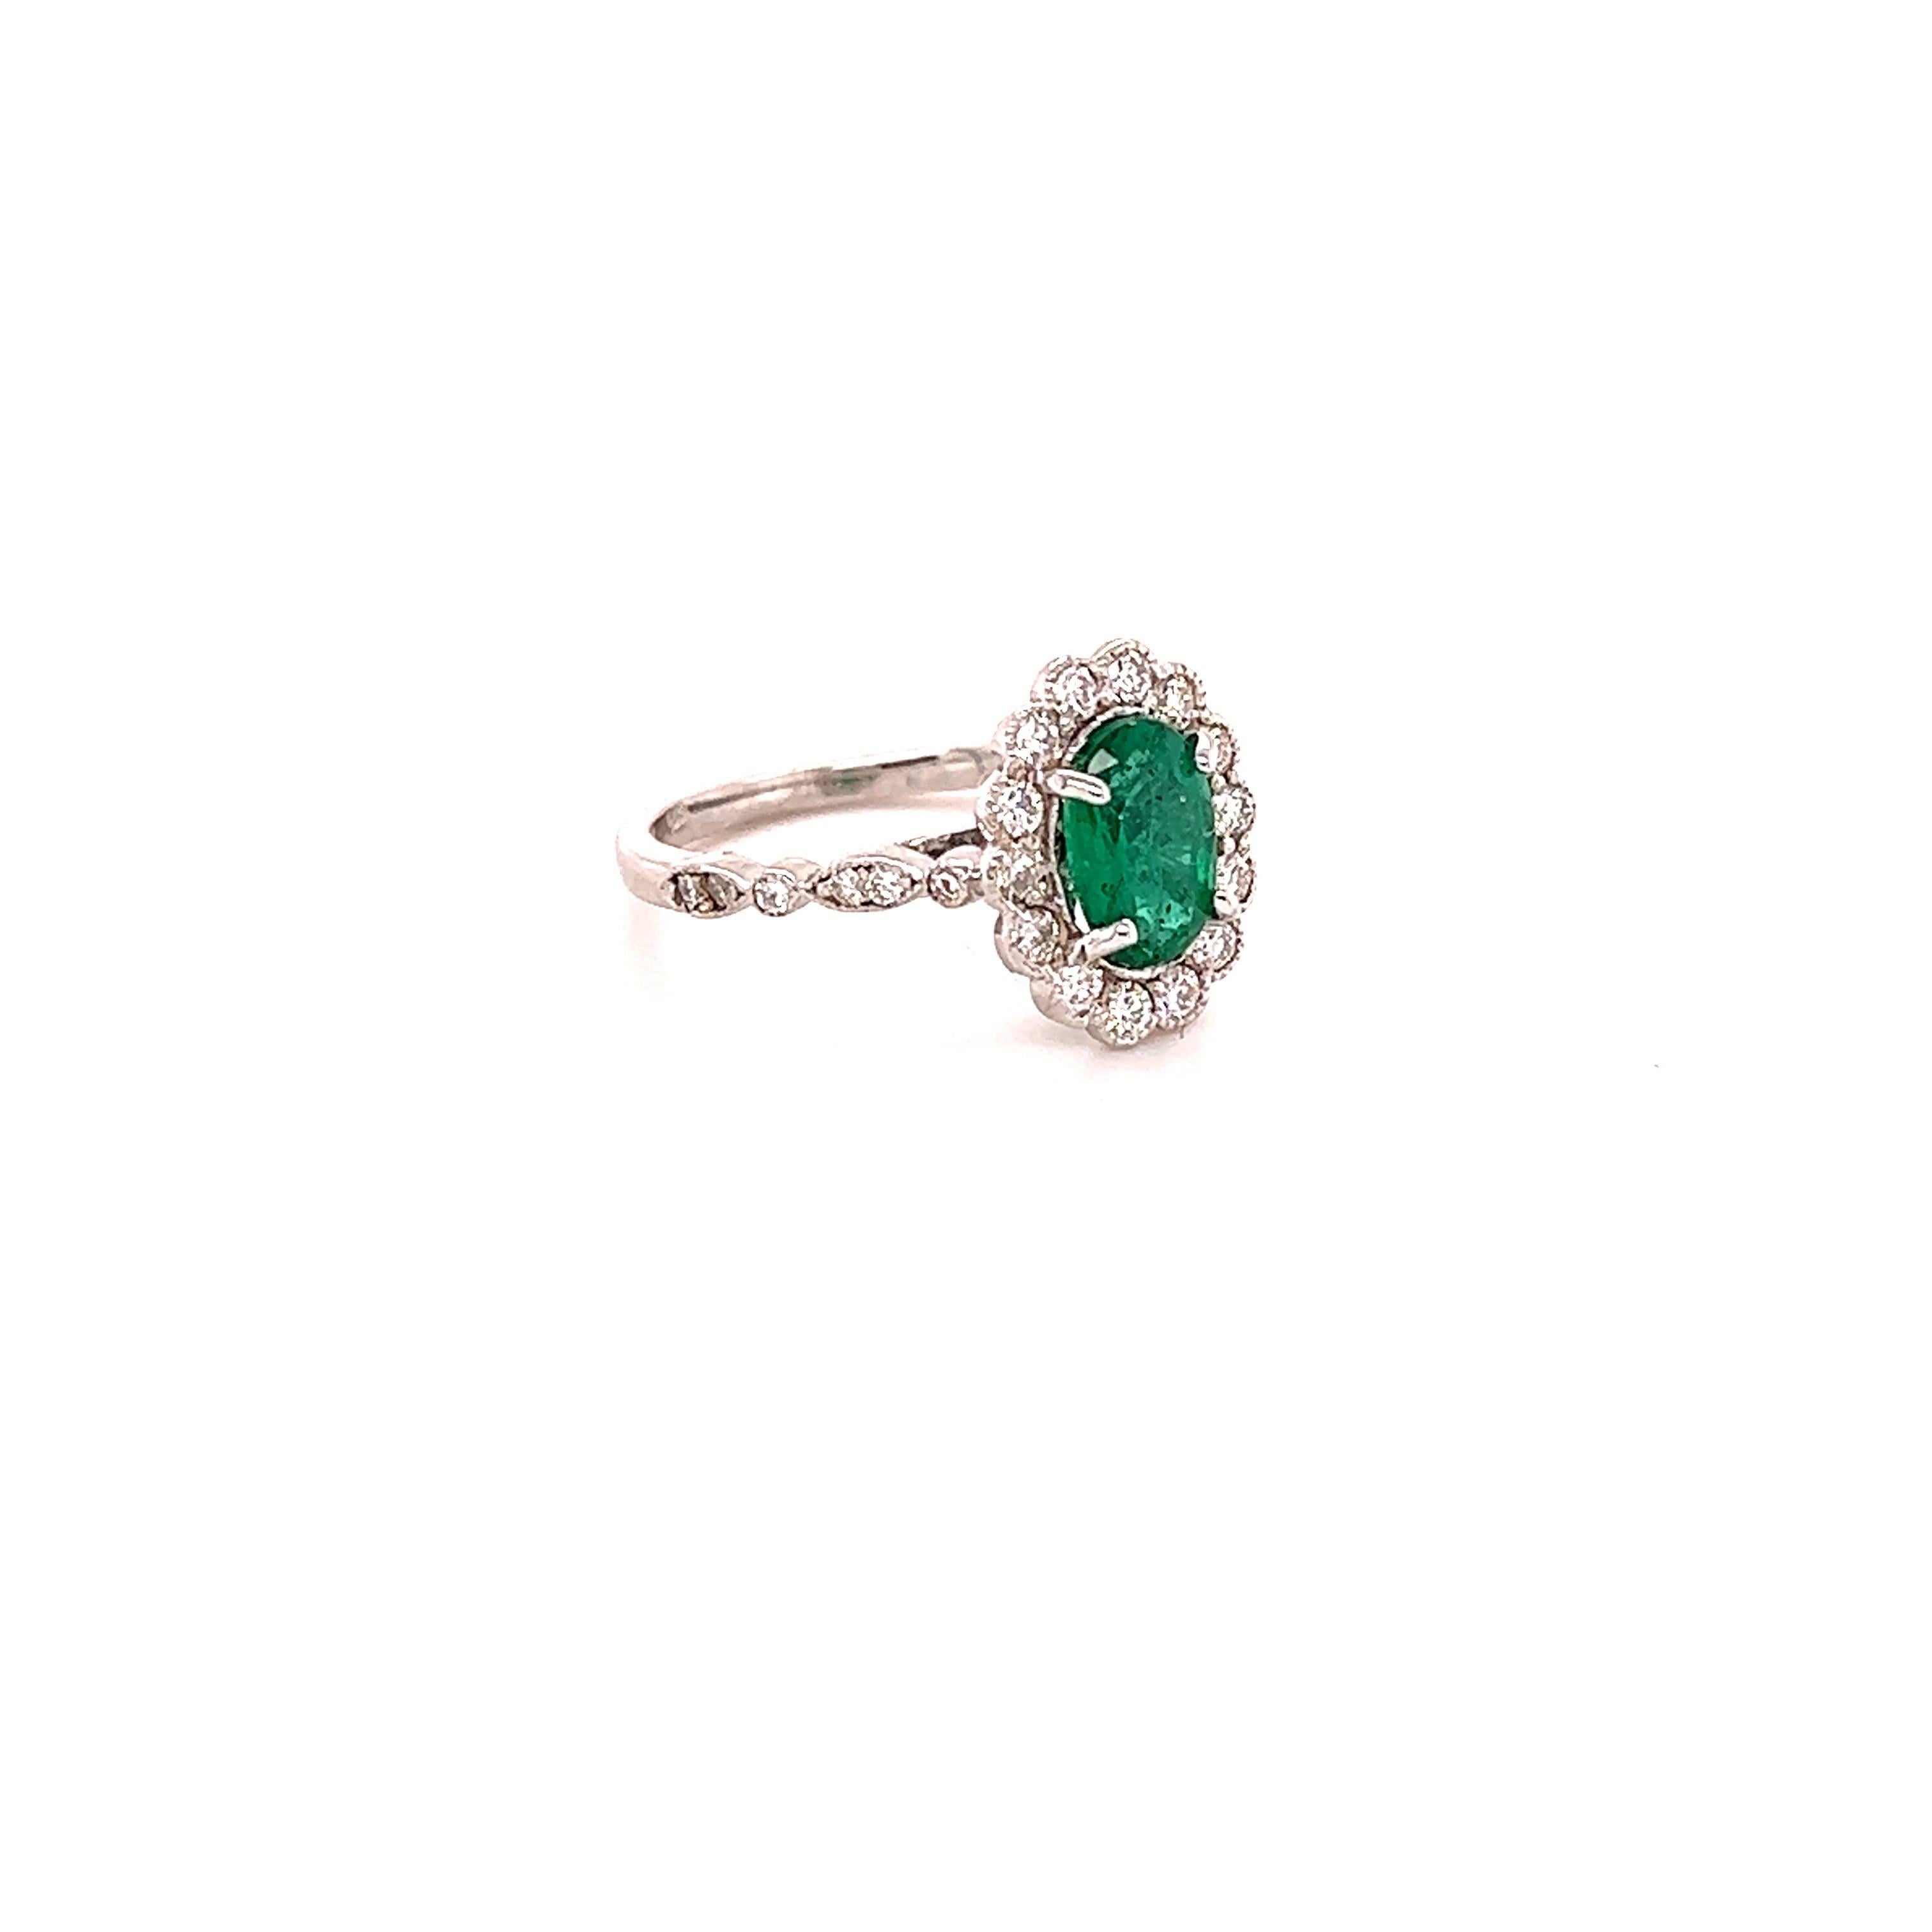 This ring has a 1.09 Carat Oval Cut Emerald and is surrounded by 28 Round Cut Diamonds that weighs 0.53 Carats. (Clarity: SI1, Color: F) The total carat weight of the ring is 1.62 carats. 
The Oval Cut Emerald measures at approximately 8 mm x 6 mm.